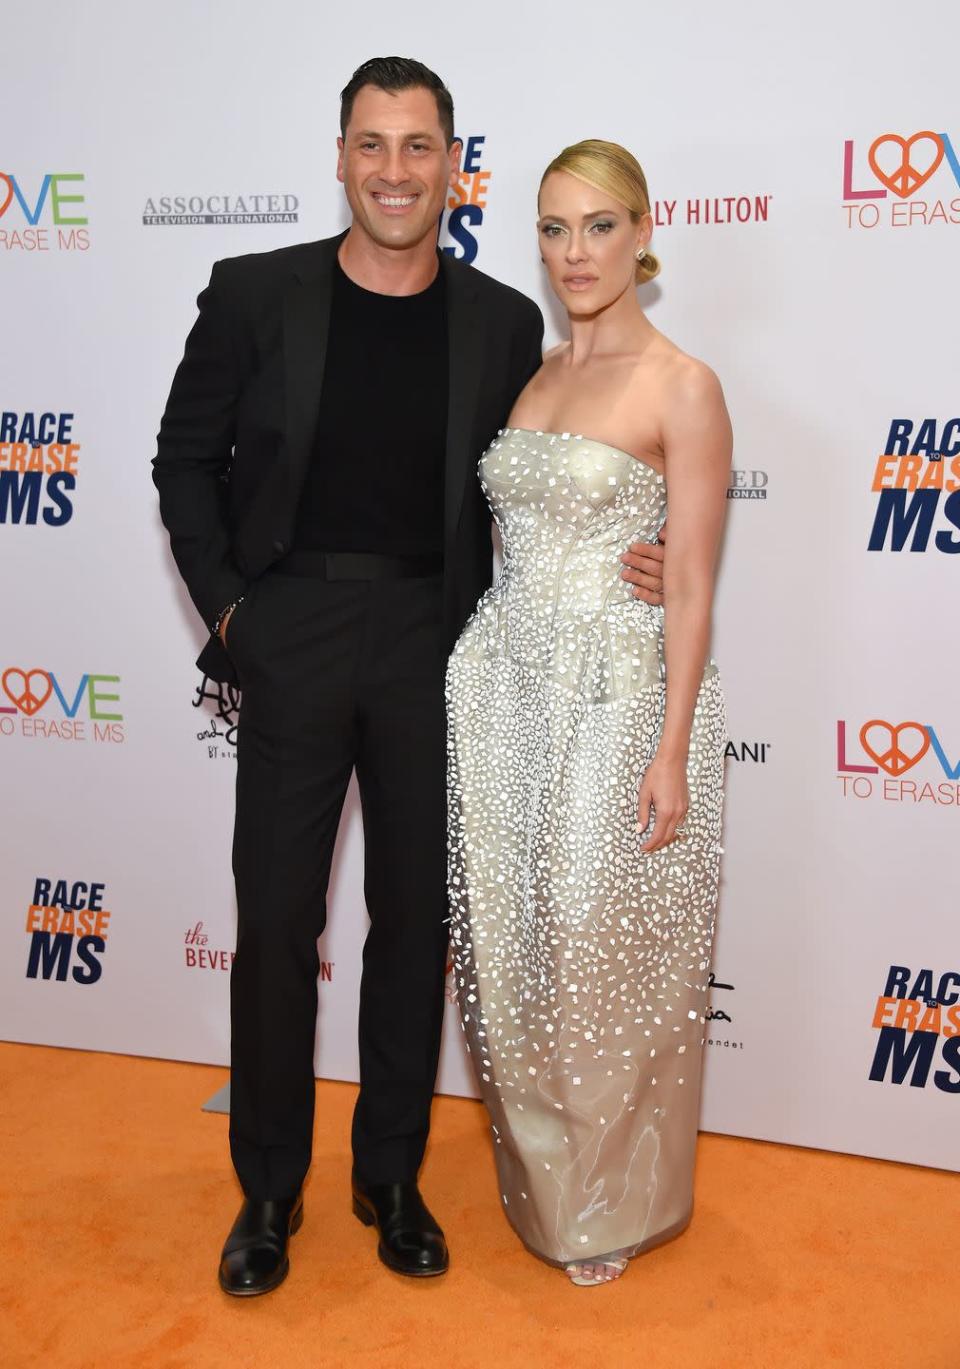 <p>Both Peta Murgatroyd and Maksim Chmerkovskiy have had their share of showmances during their time as professional dancers on the show. But in 2014, the two decided to partner up together—and got engaged the following year. The lovebirds welcomed their son, Shai Aleksander, in January 2017, before marrying a few months later in July. </p>